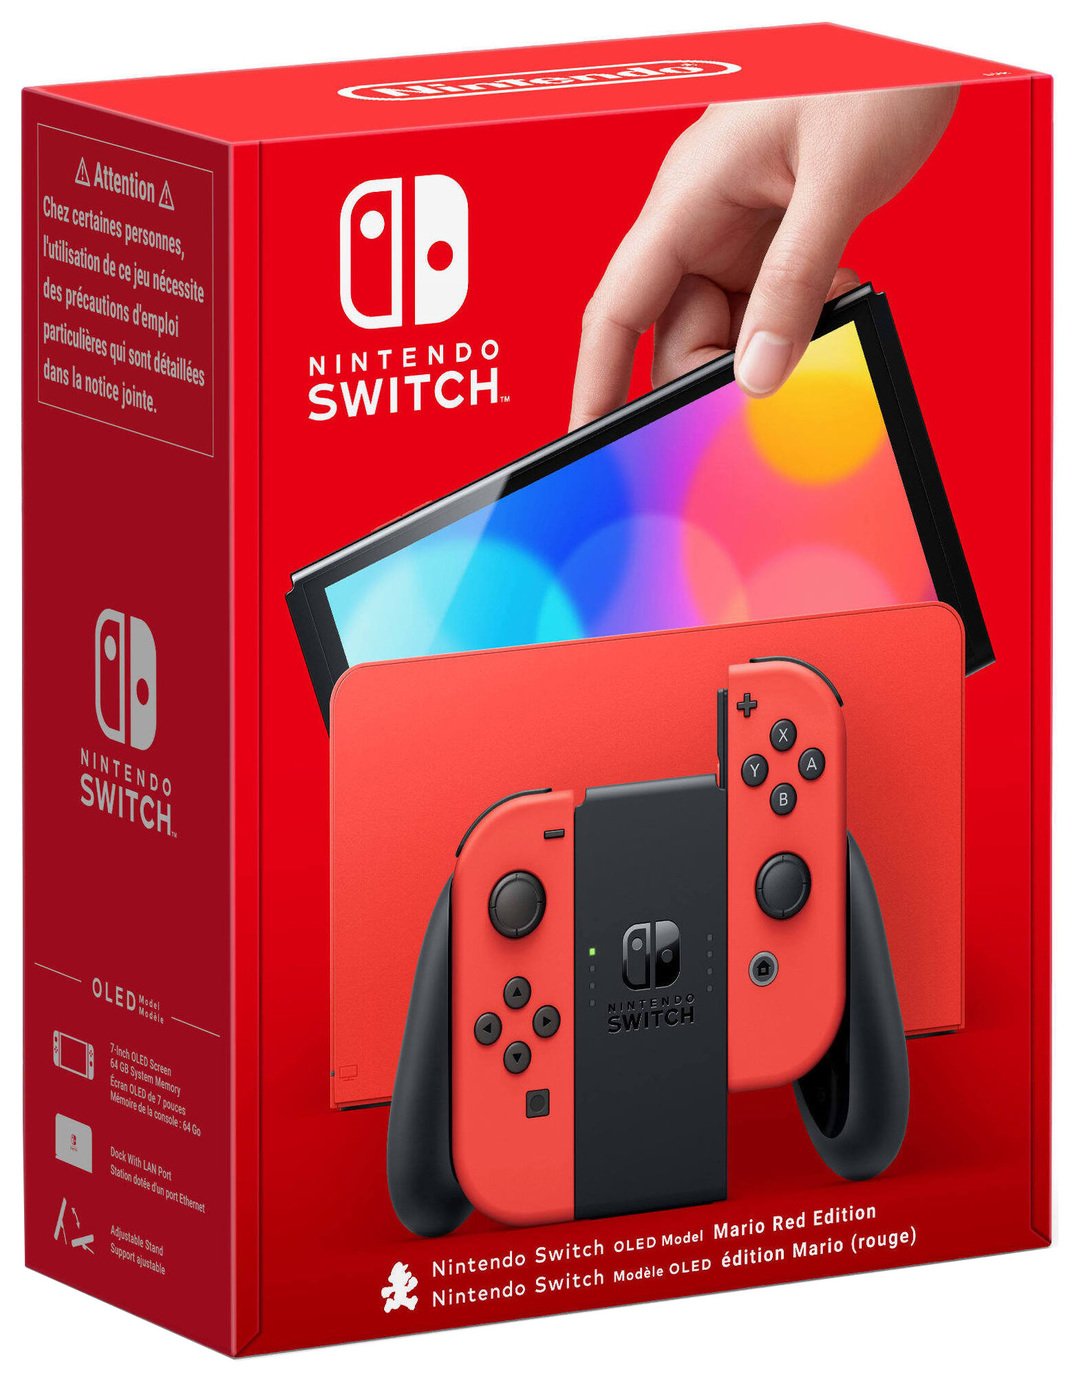 Rumor: Switch 2 Development kits already in the hands of game